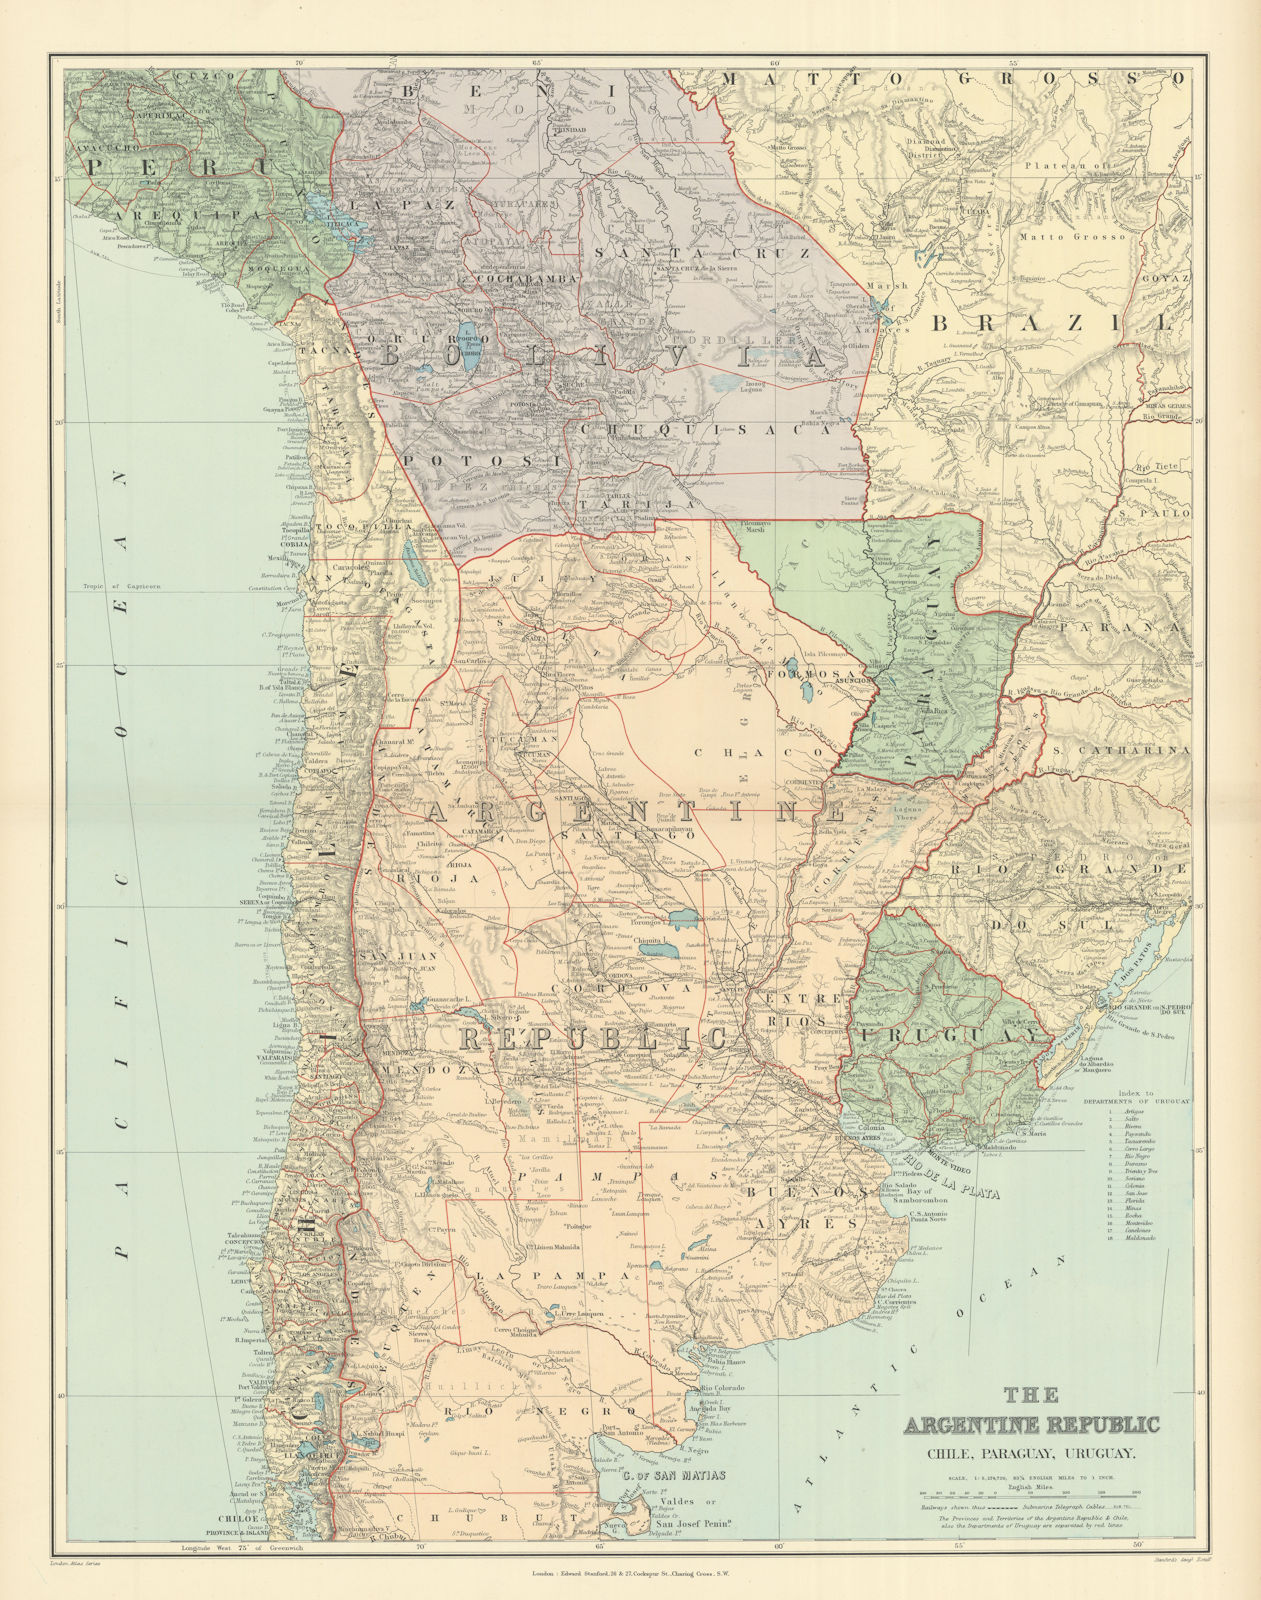 Argentine Republic, Chile, Paraguay & Uruguay. South America. STANFORD 1894 map